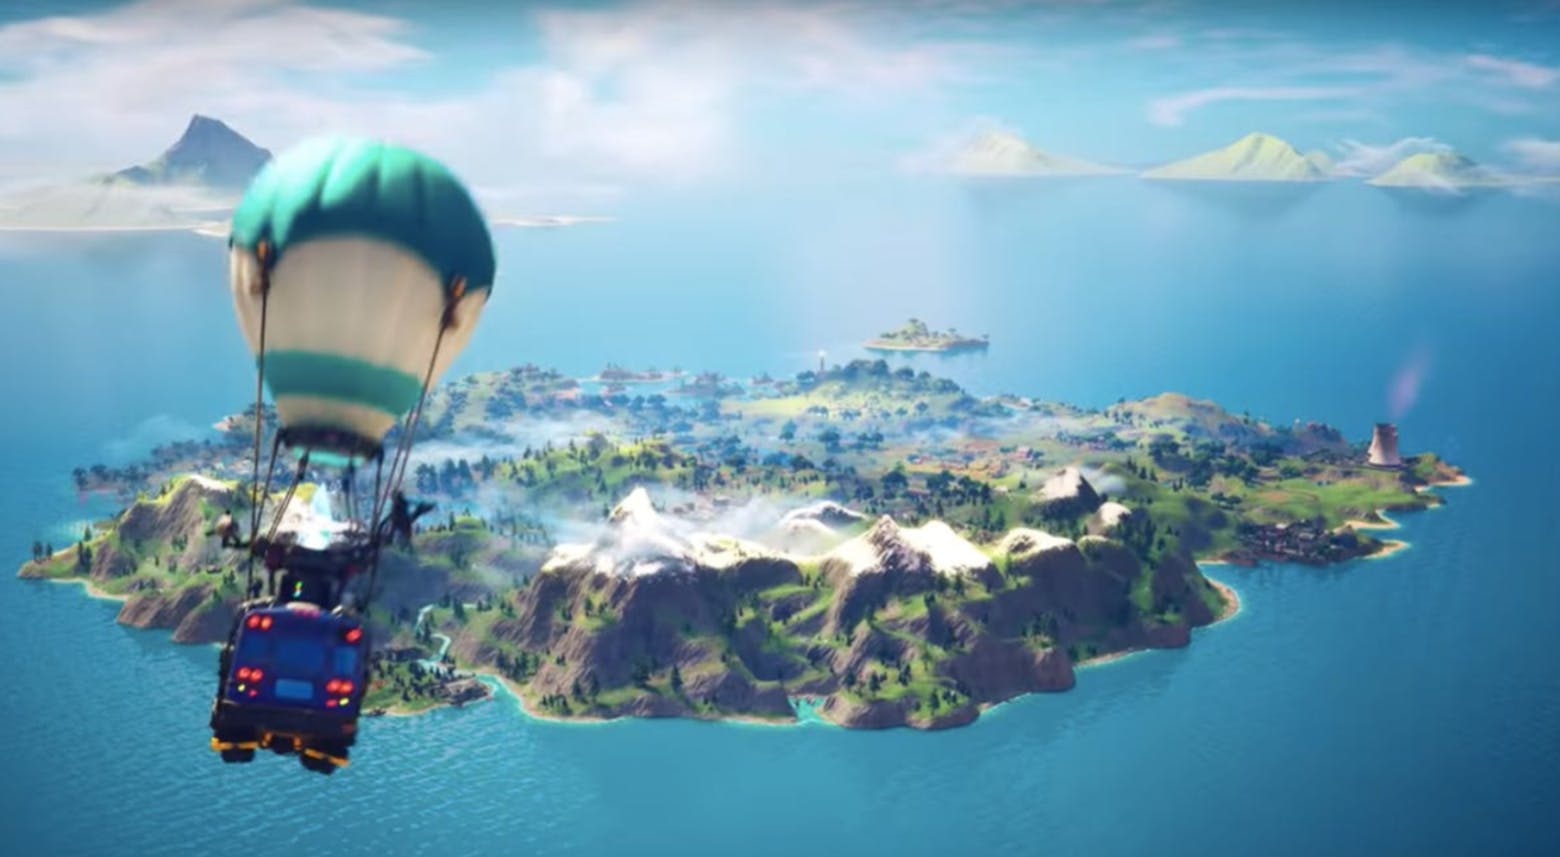 An overview of the Fortnite island